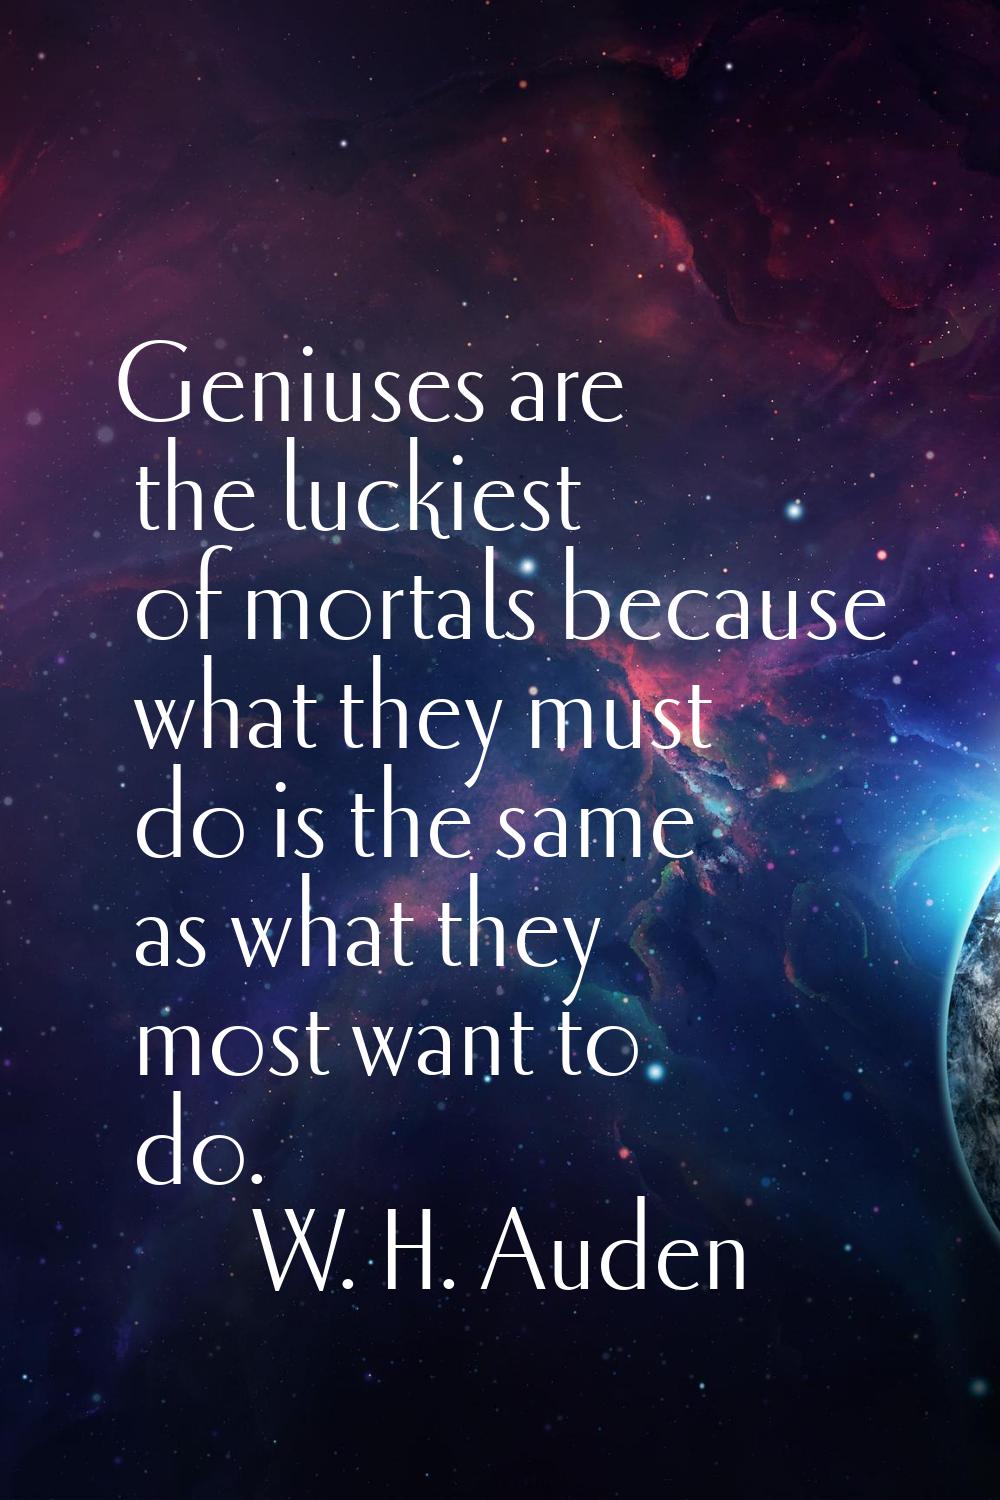 Geniuses are the luckiest of mortals because what they must do is the same as what they most want t